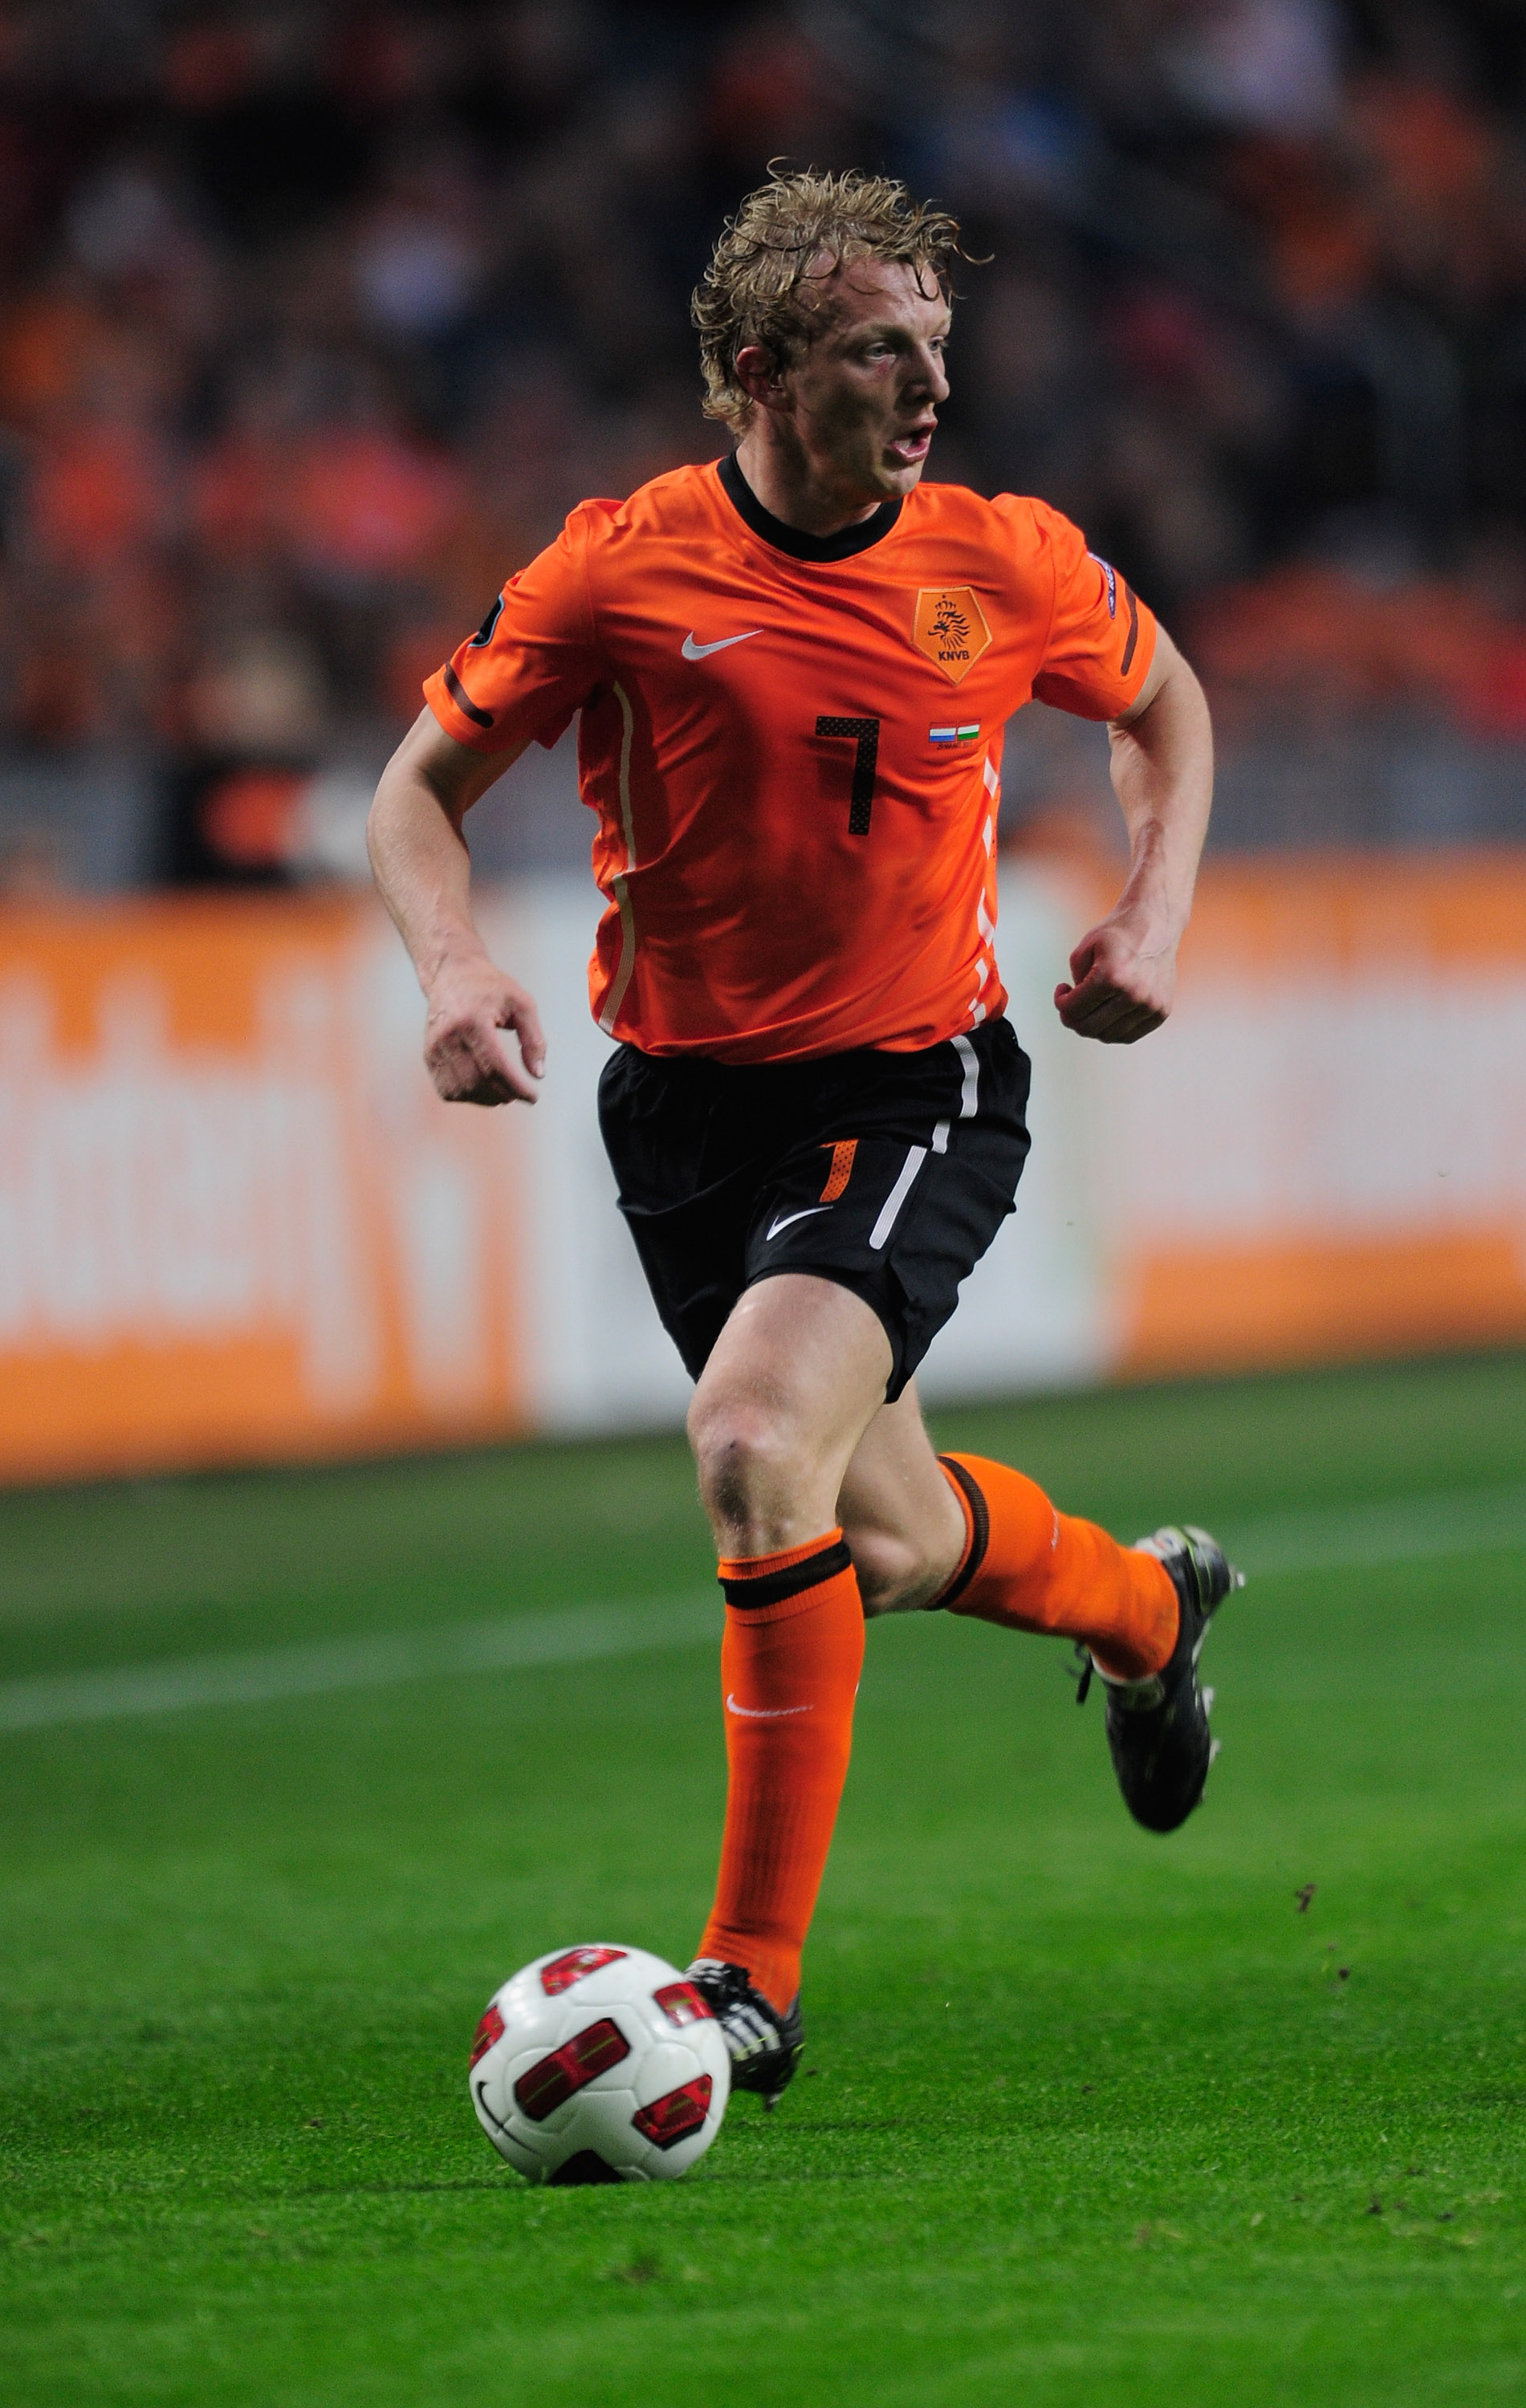 AMSTERDAM, NETHERLANDS - MARCH 29:  Dirk Kuyt of the Netherlands in action during the Group E, EURO 2012 Qualifier between Netherlands and Hungary at the Amsterdam Arena on March 29, 2011 in Amsterdam, Netherlands.  (Photo by Jamie McDonald/Getty Images)